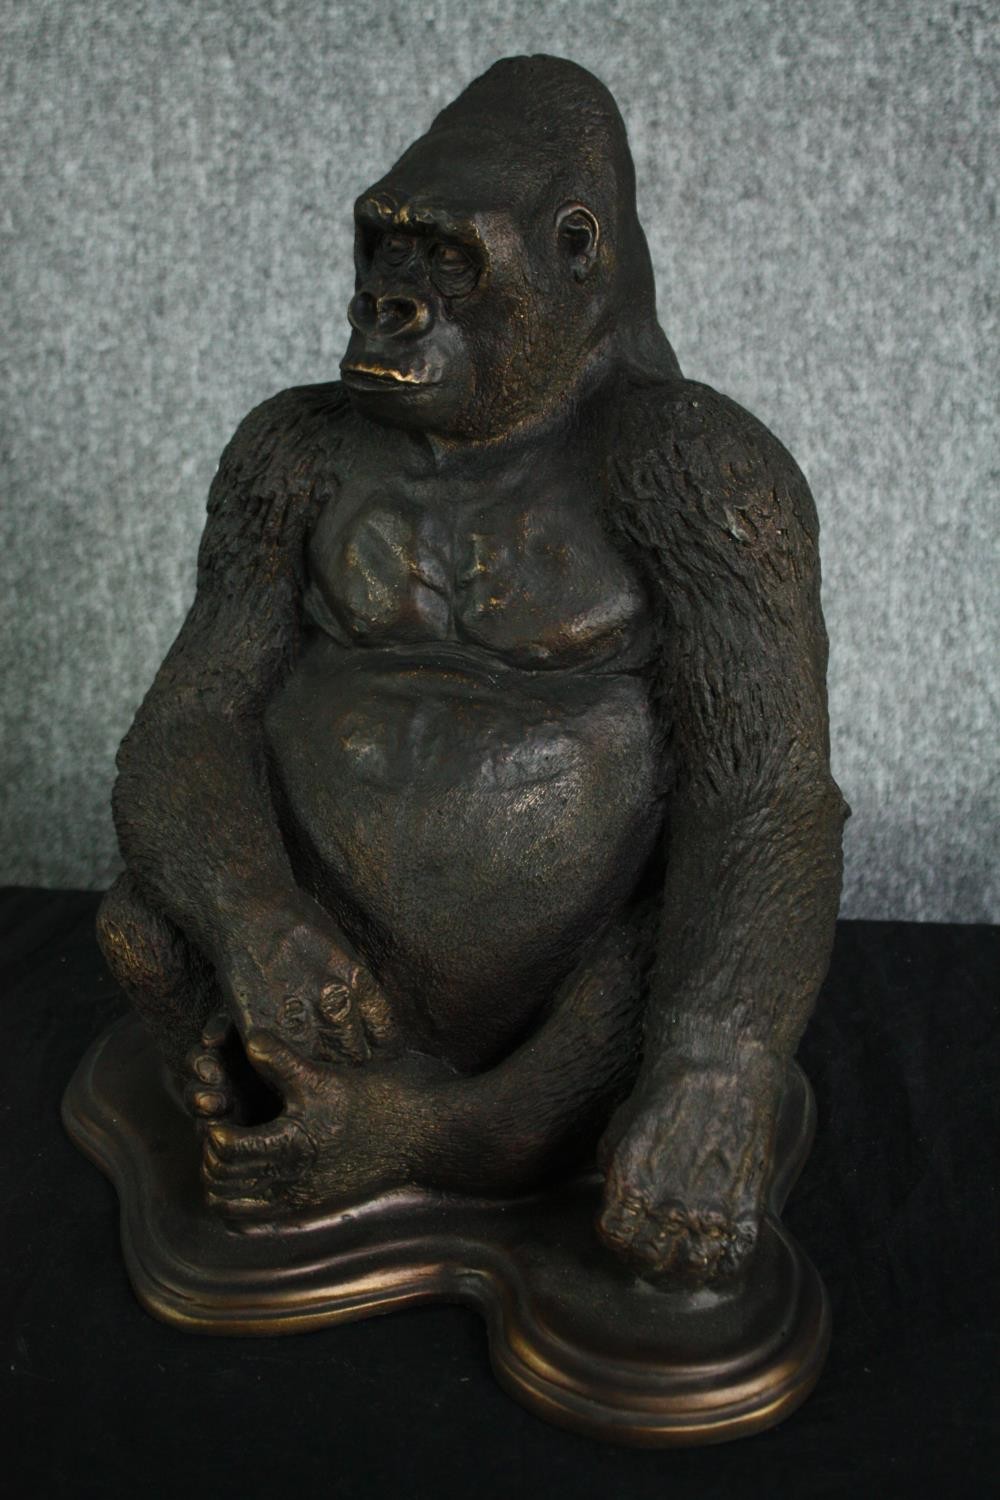 A large moulded figure. A gorilla finished in a distressed bronze type patina. H.40cm. - Image 4 of 4